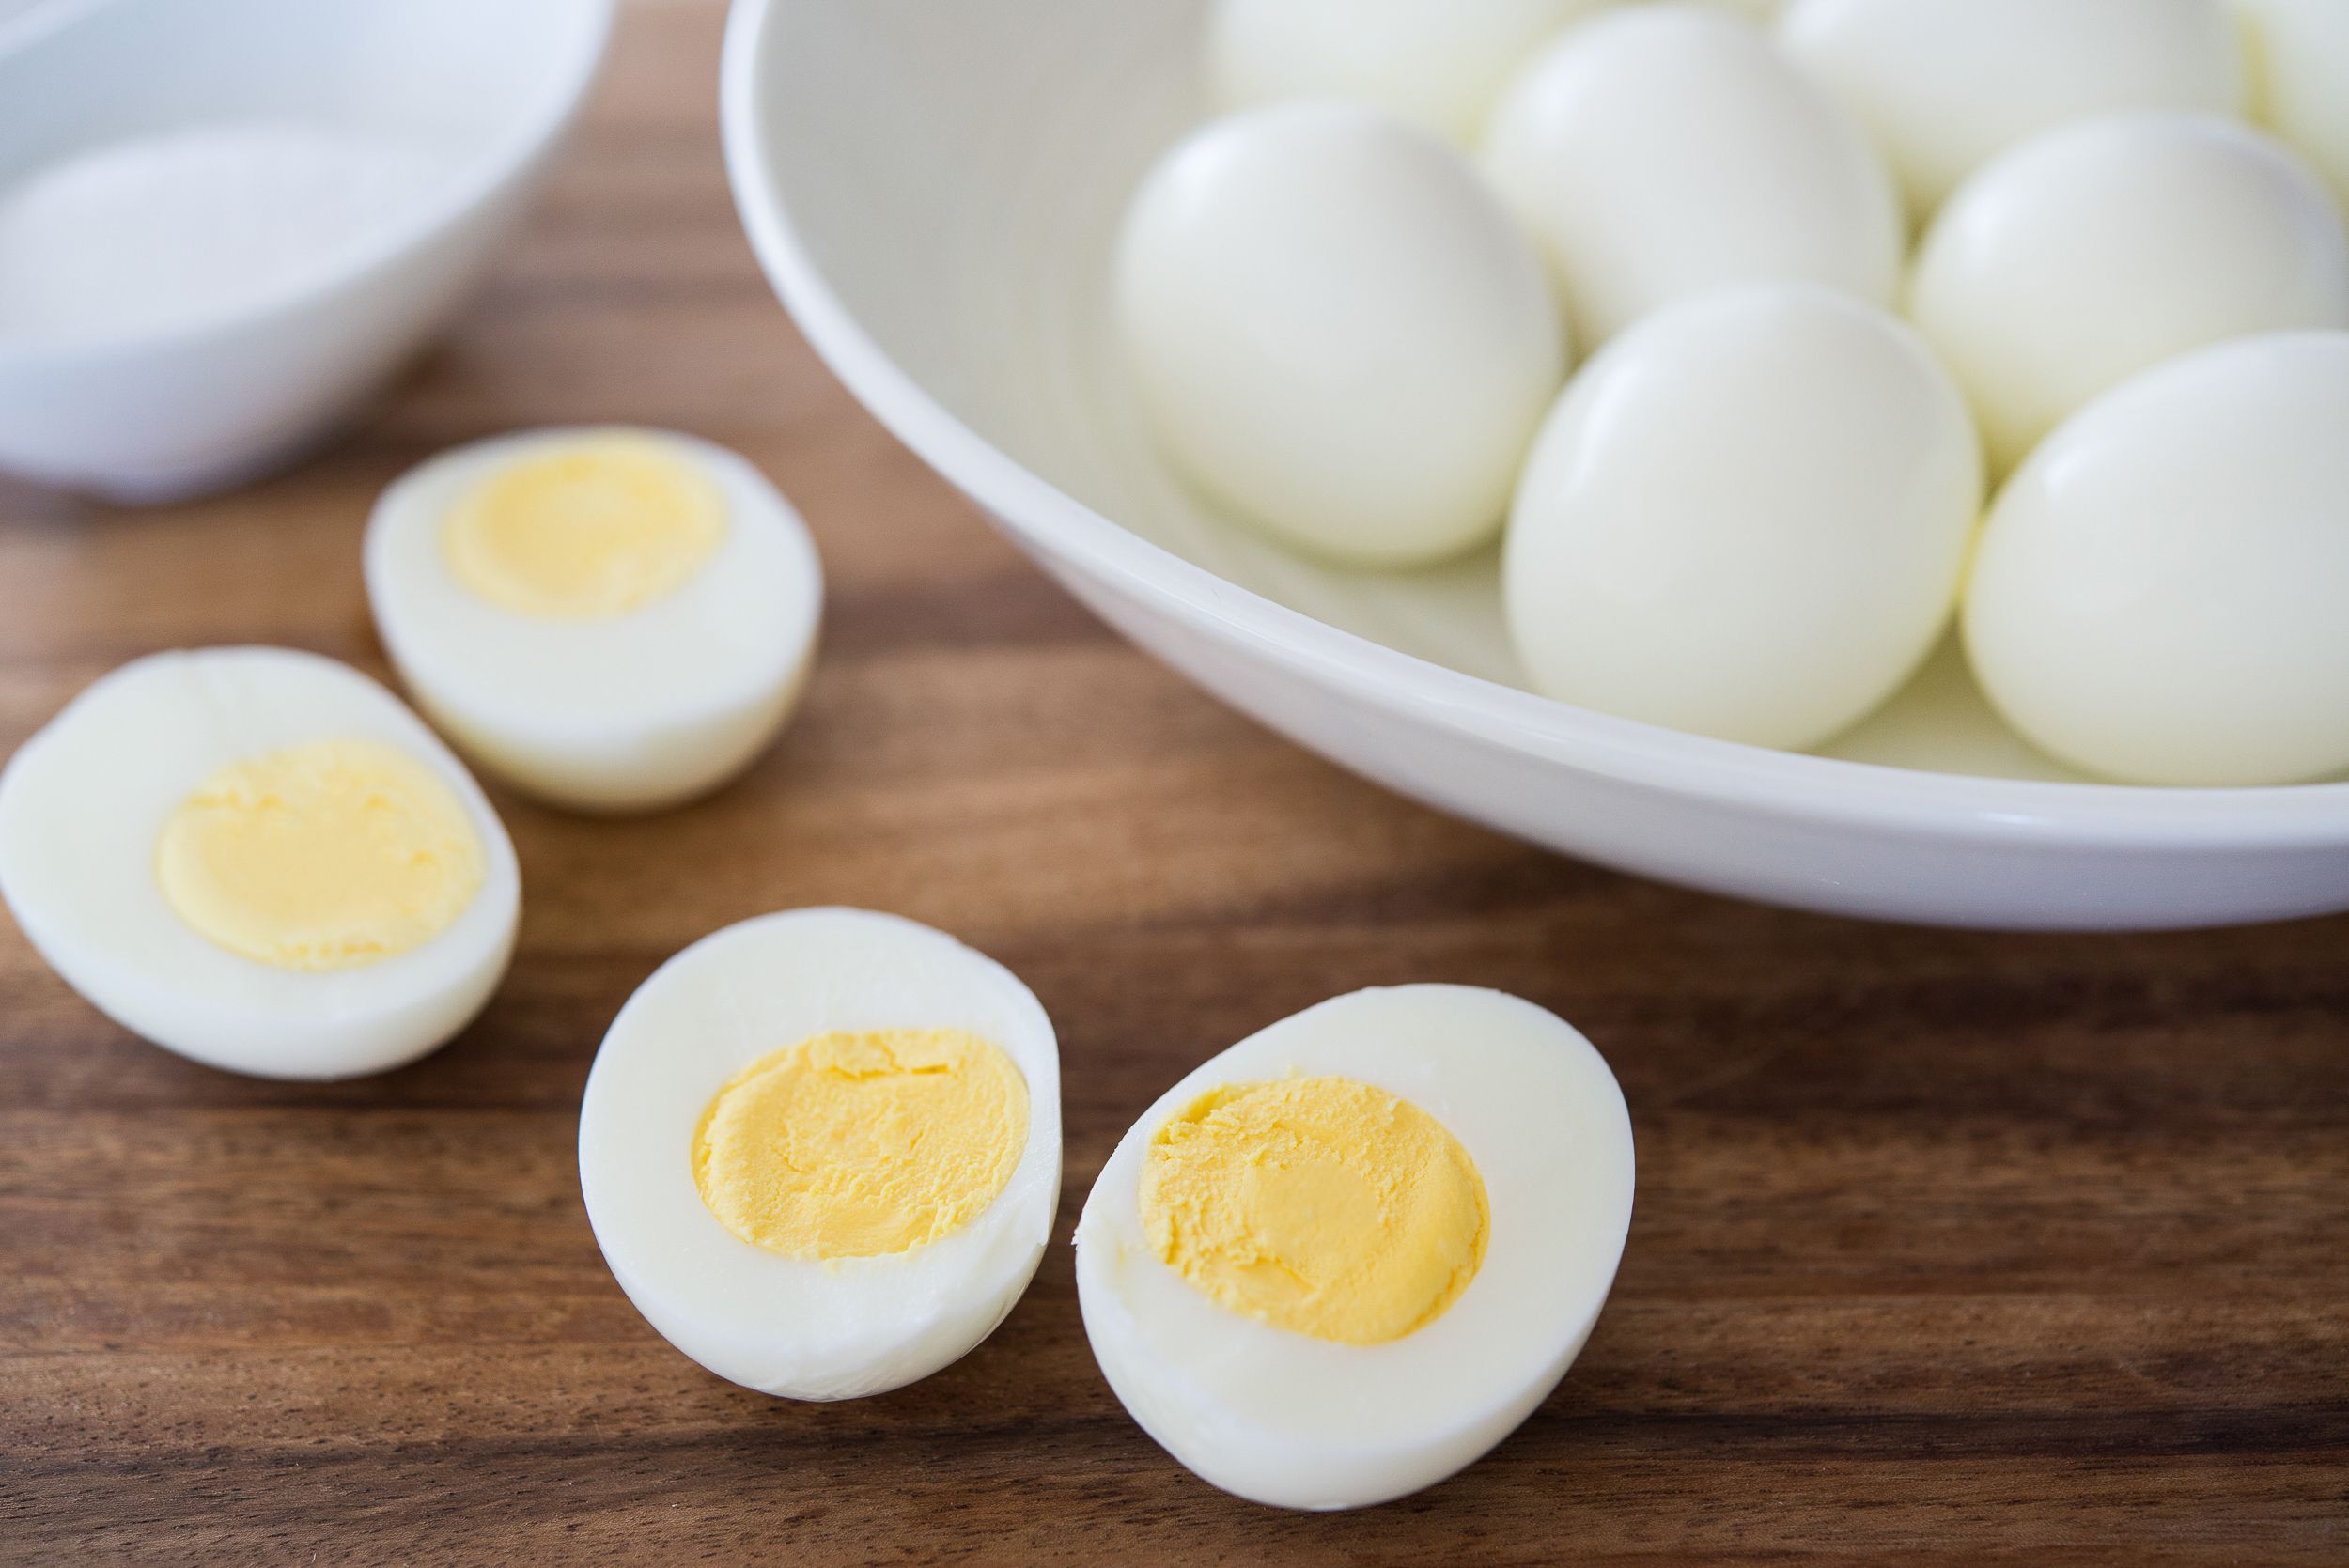 Easy Peel Boiled Eggs Are Key To Making Perfect Deviled Eggs